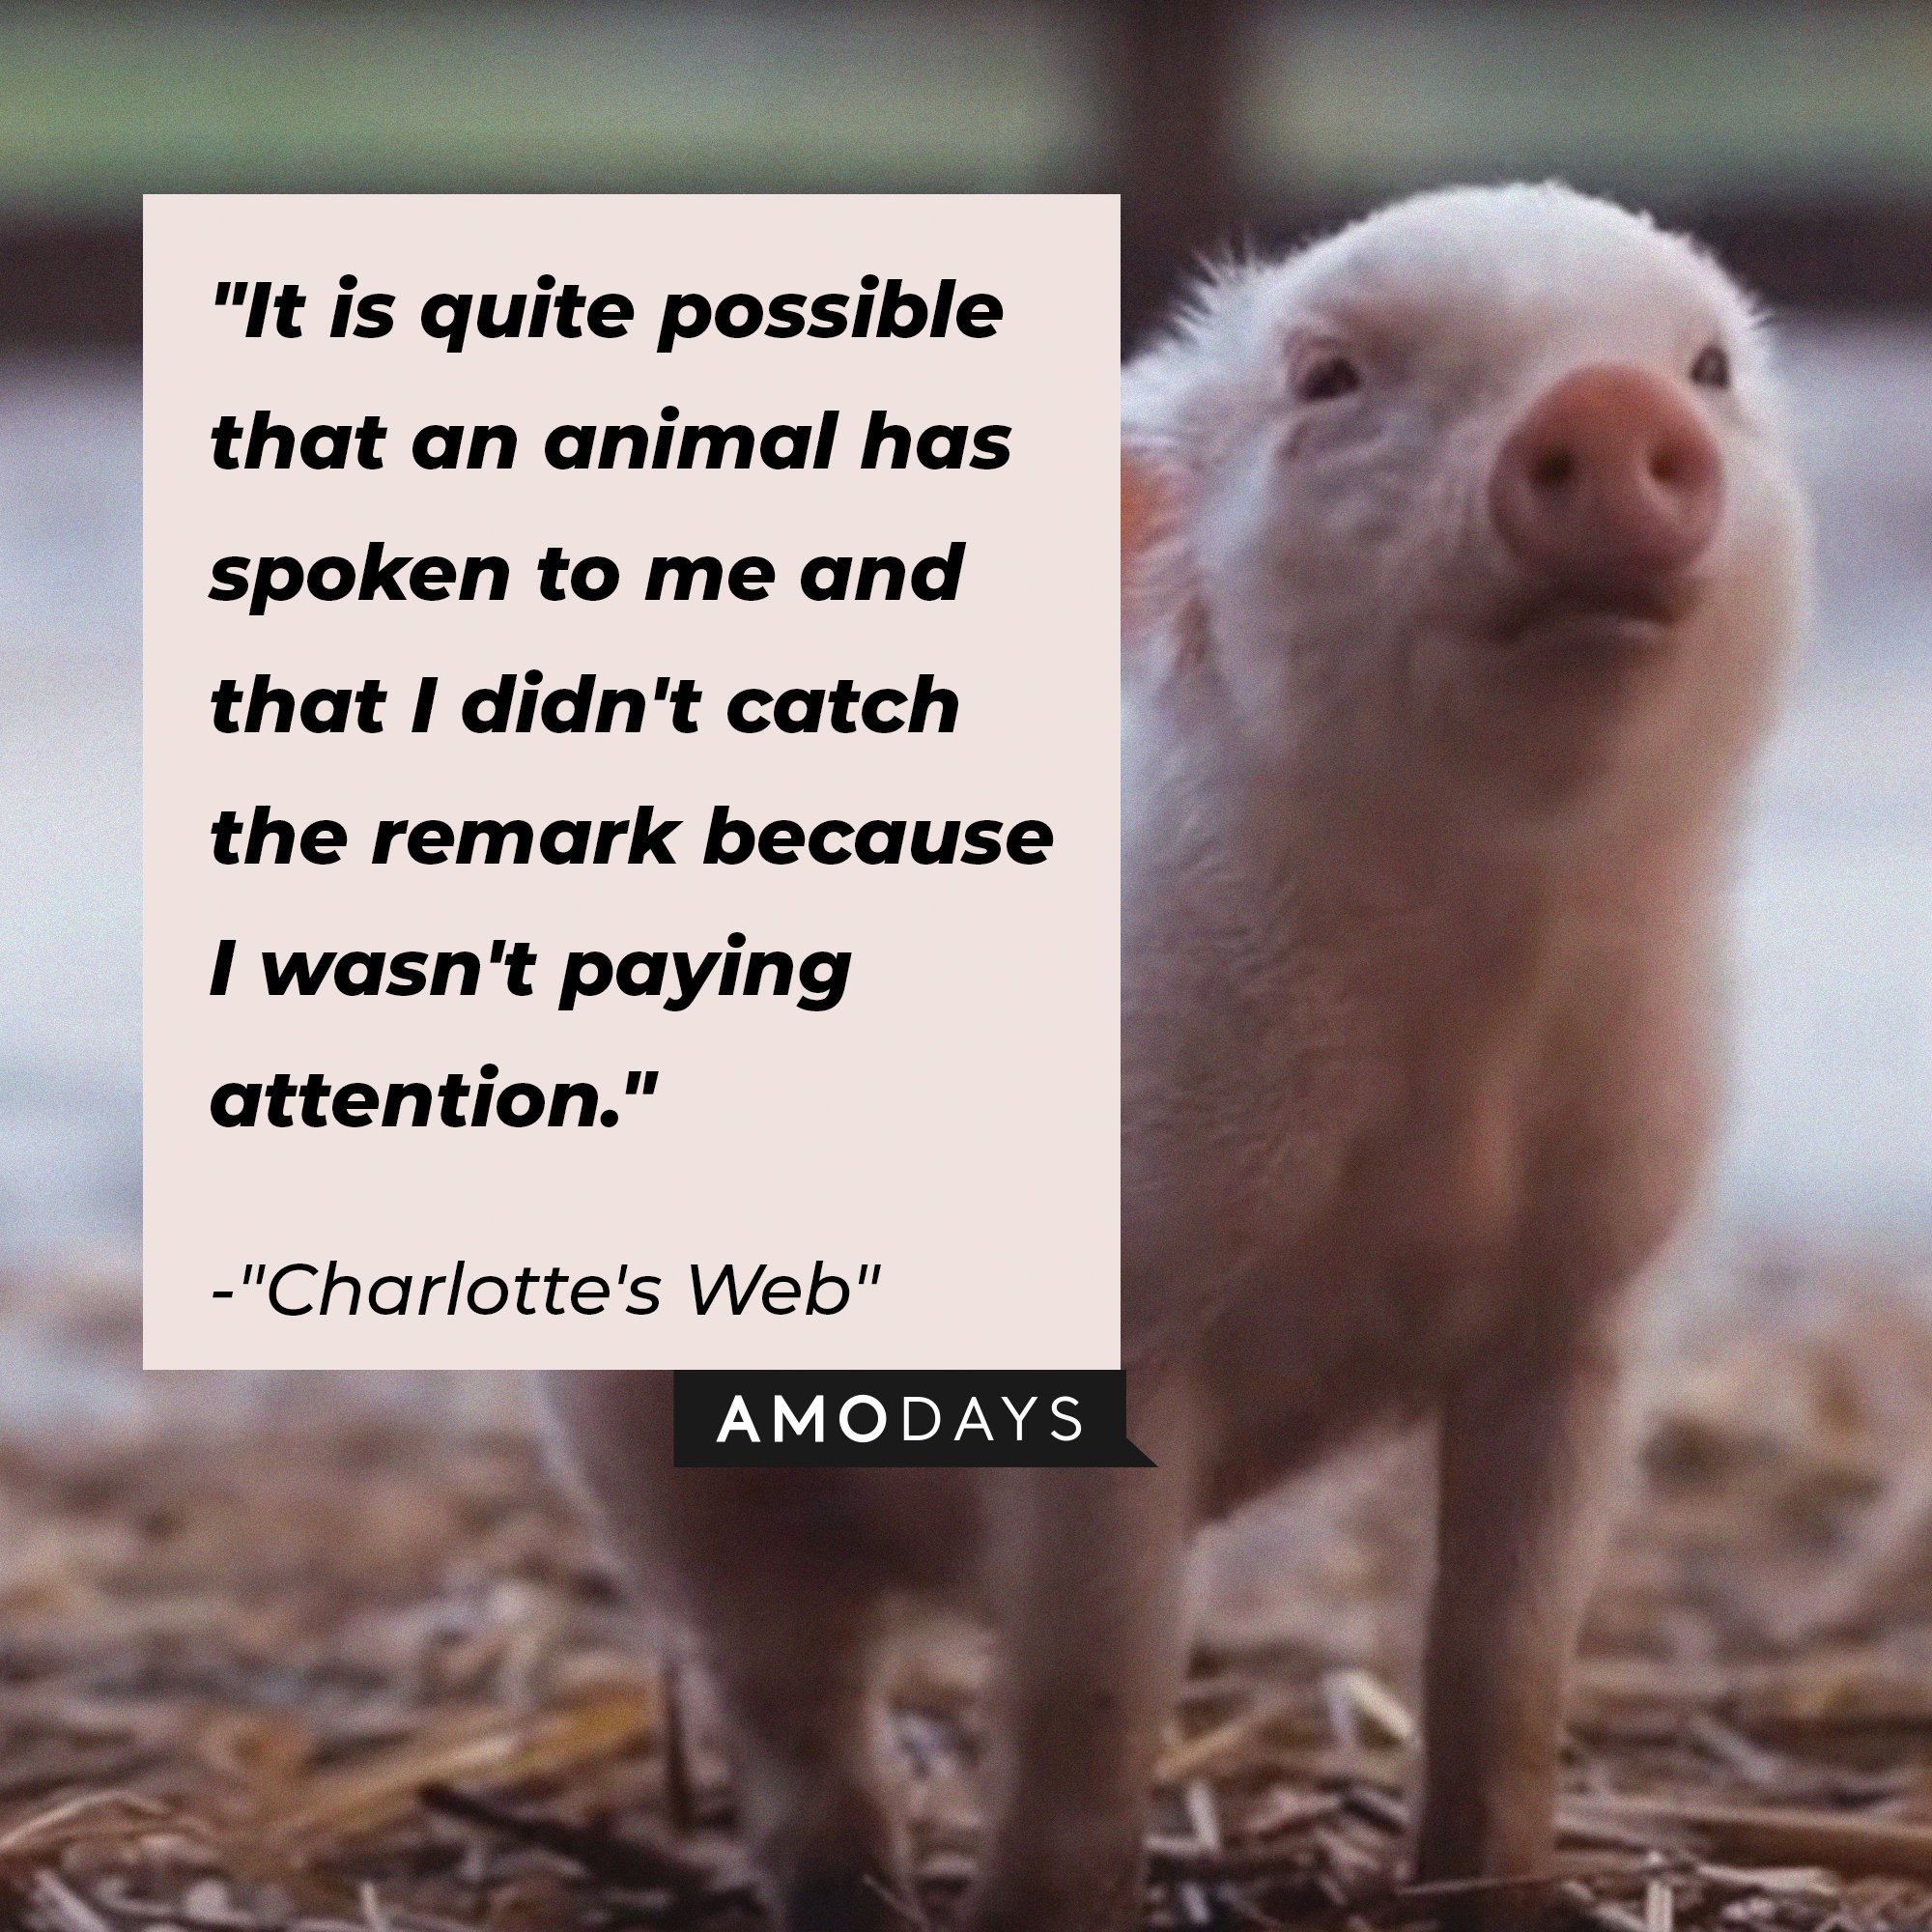 Charlotte's Web quote: "It is quite possible that an animal has spoken to me and that I didn't catch the remark because I wasn't paying attention." | Image: AmoDays